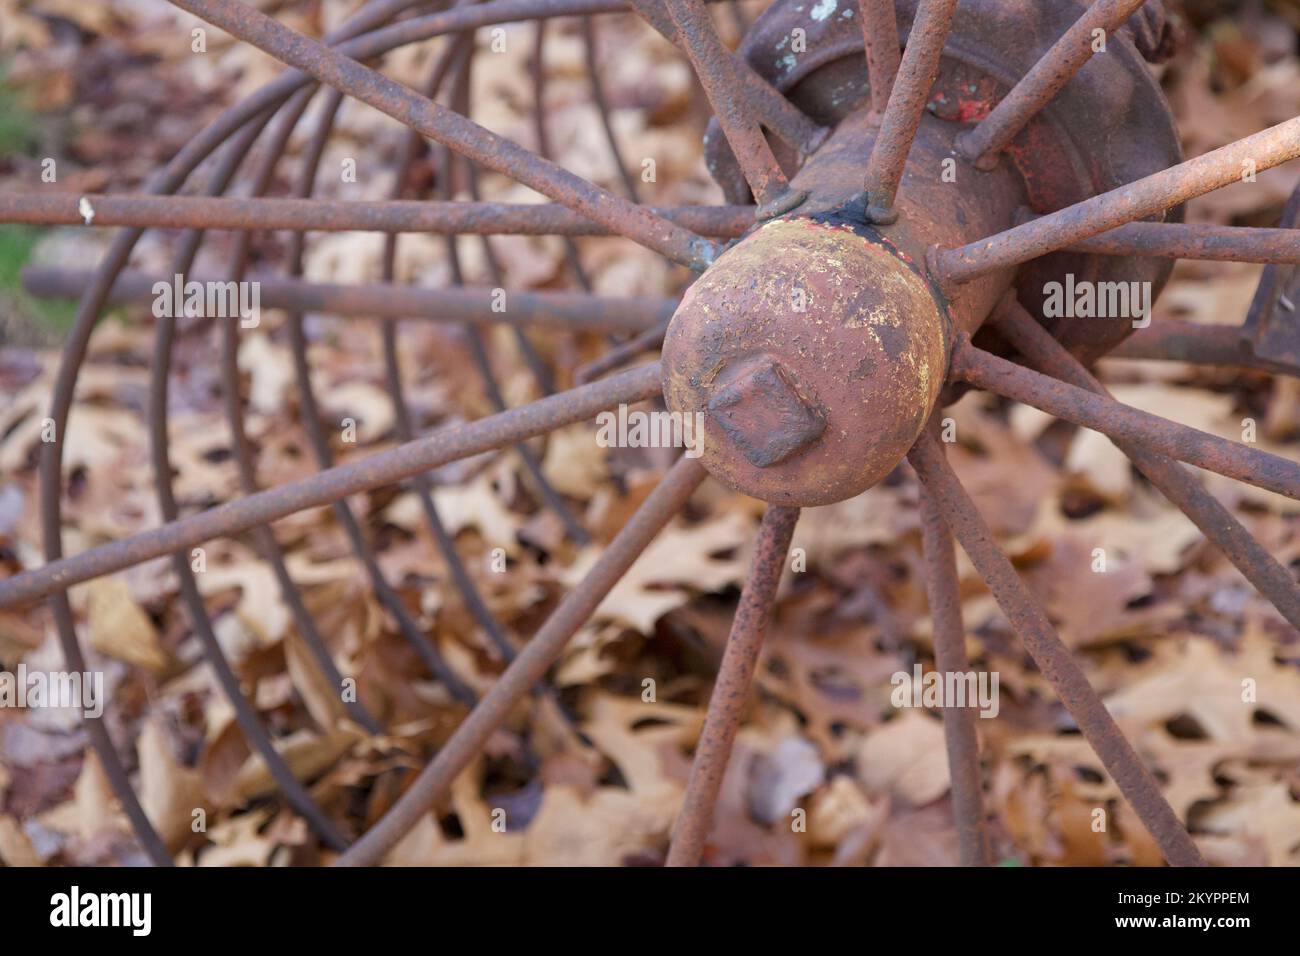 Vintage, rusty farm equipment in New England with dried, autumn leaves in the background Stock Photo